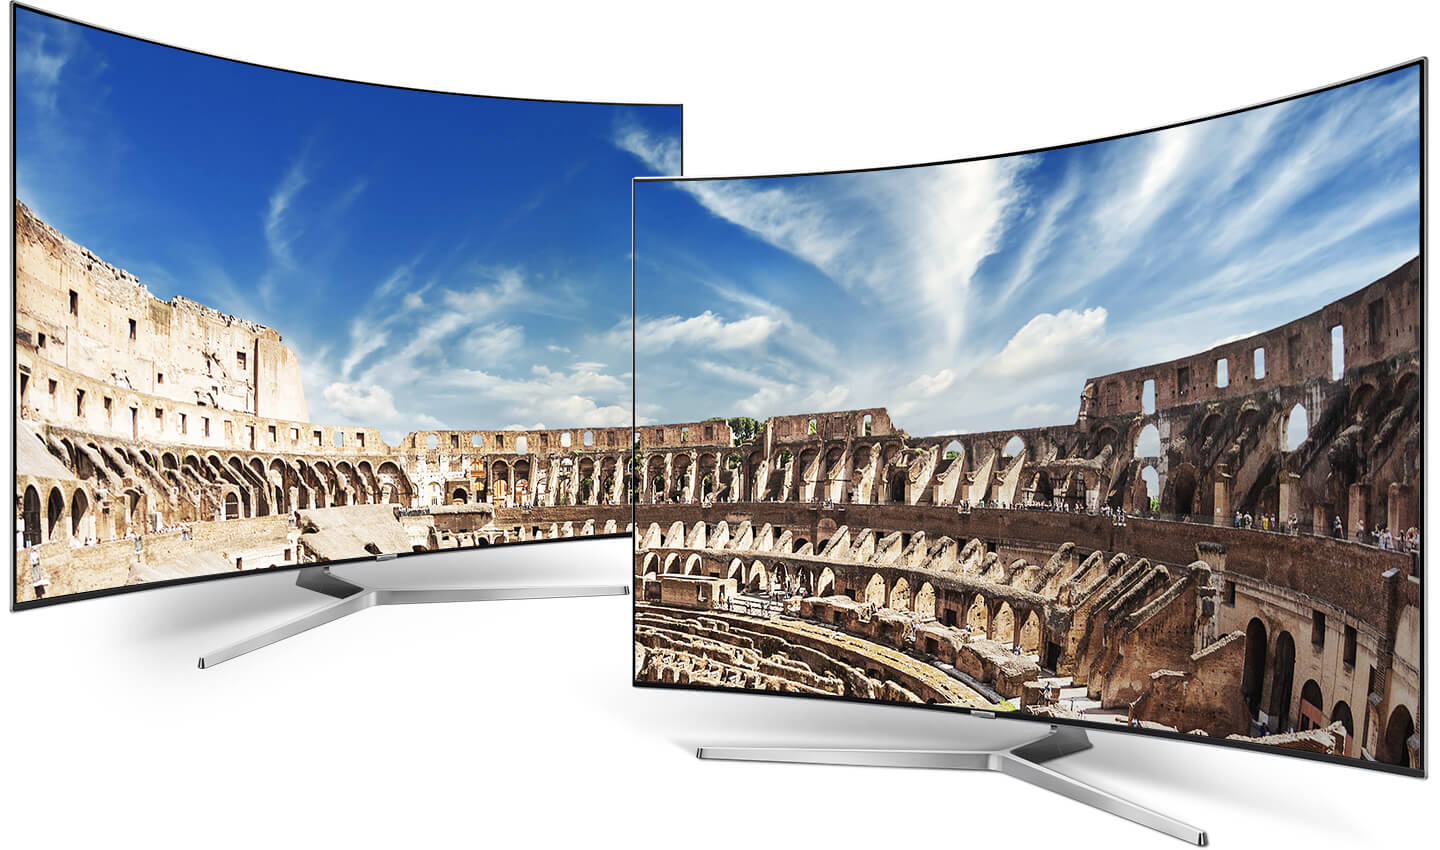 Two curved Samsung TVs are standing and an amphitheater image is on a TV screen.